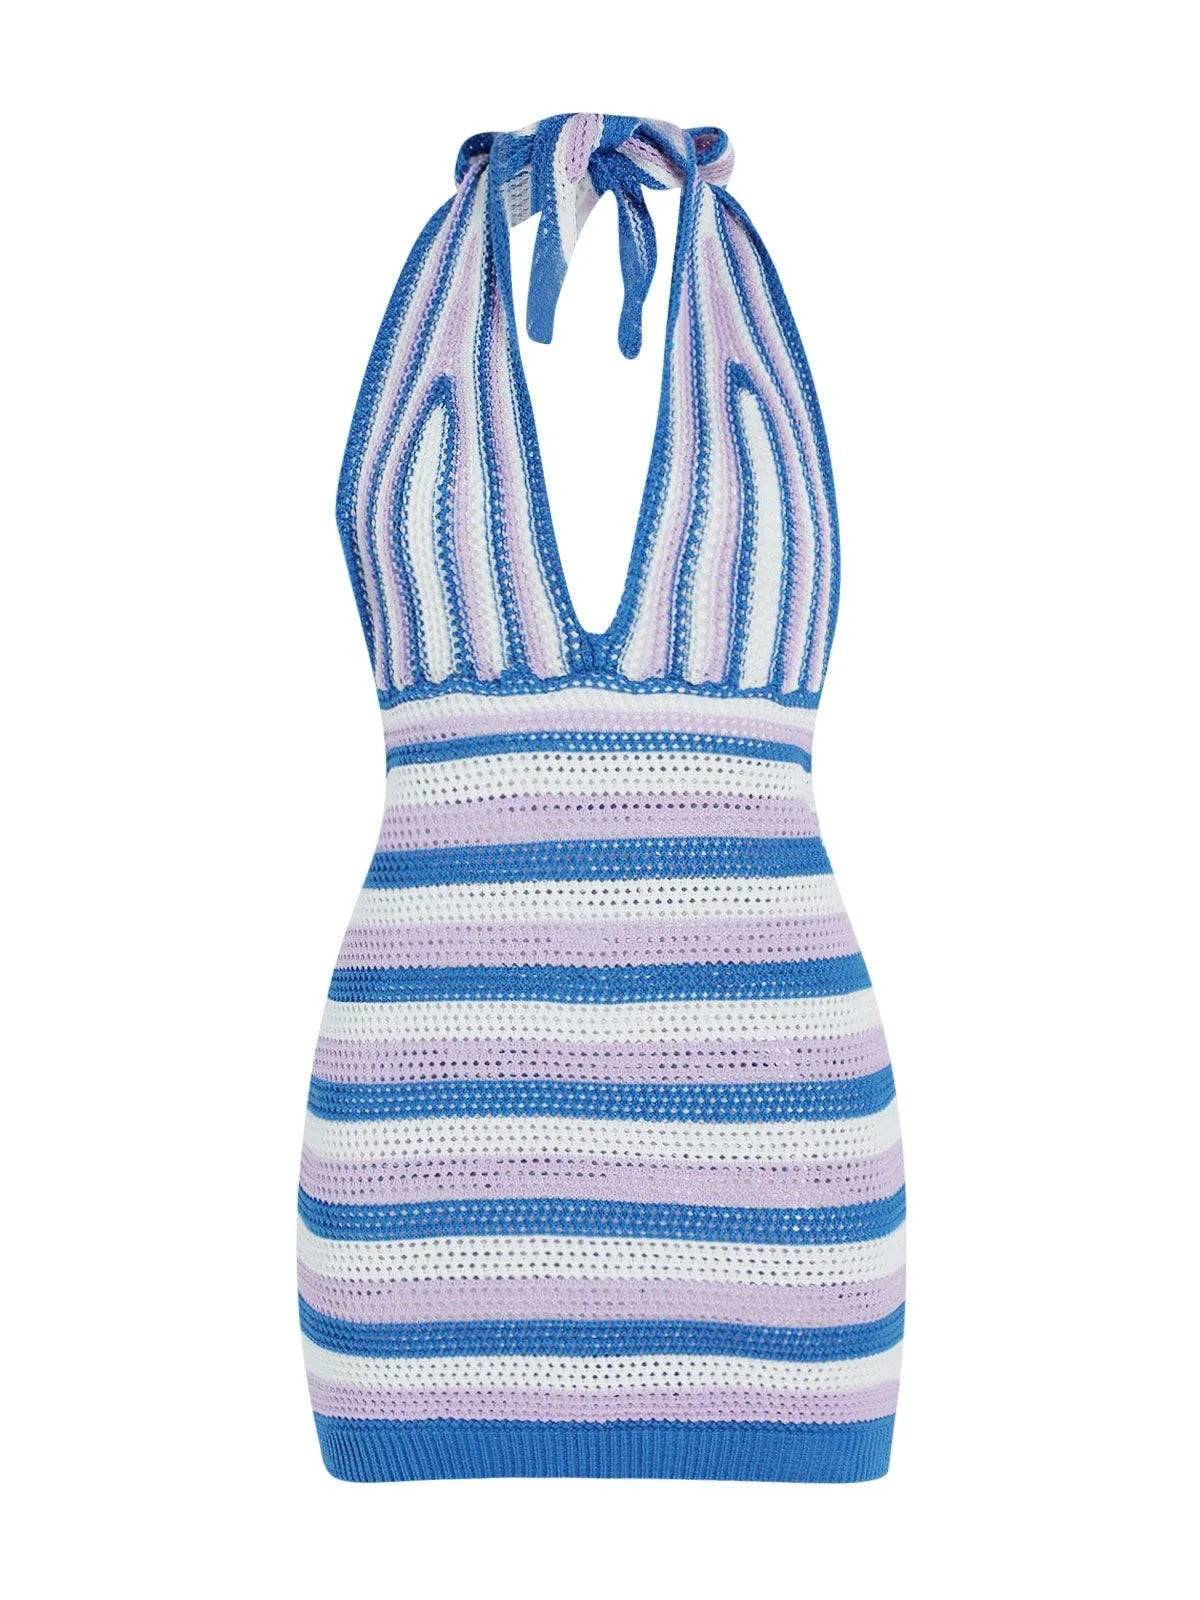 Fashionable and Feminine: Halter Neck Knitted Dress